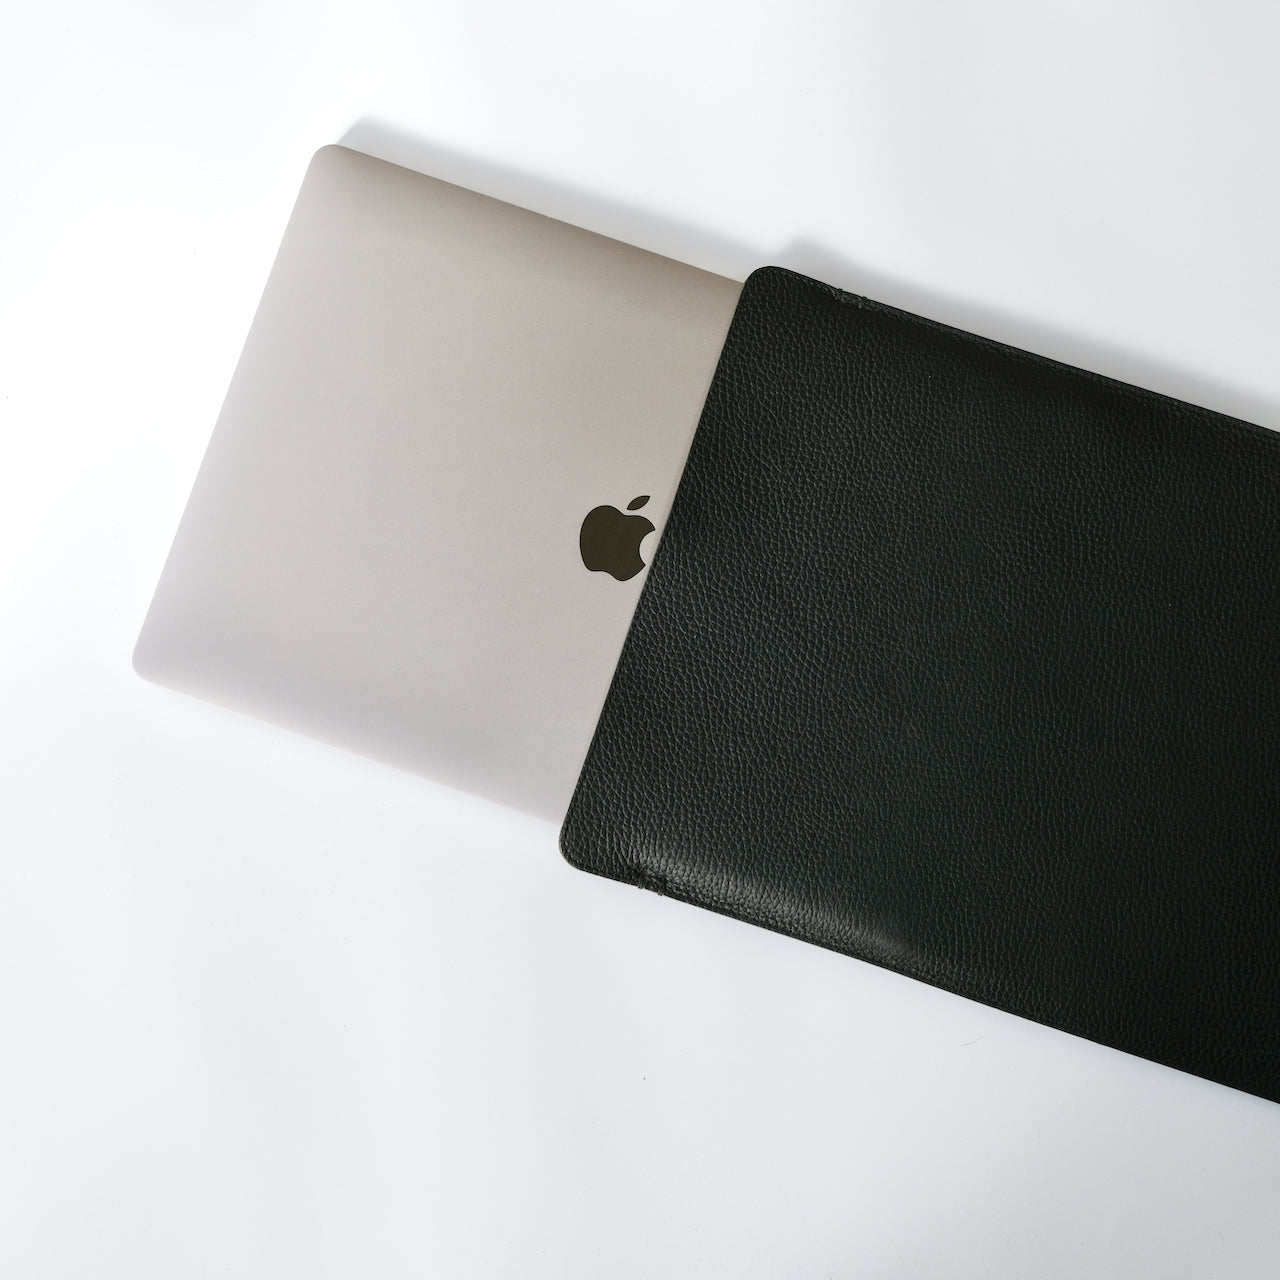 MacBook Pro 16 inches is a slim, thin but solid sleeve case